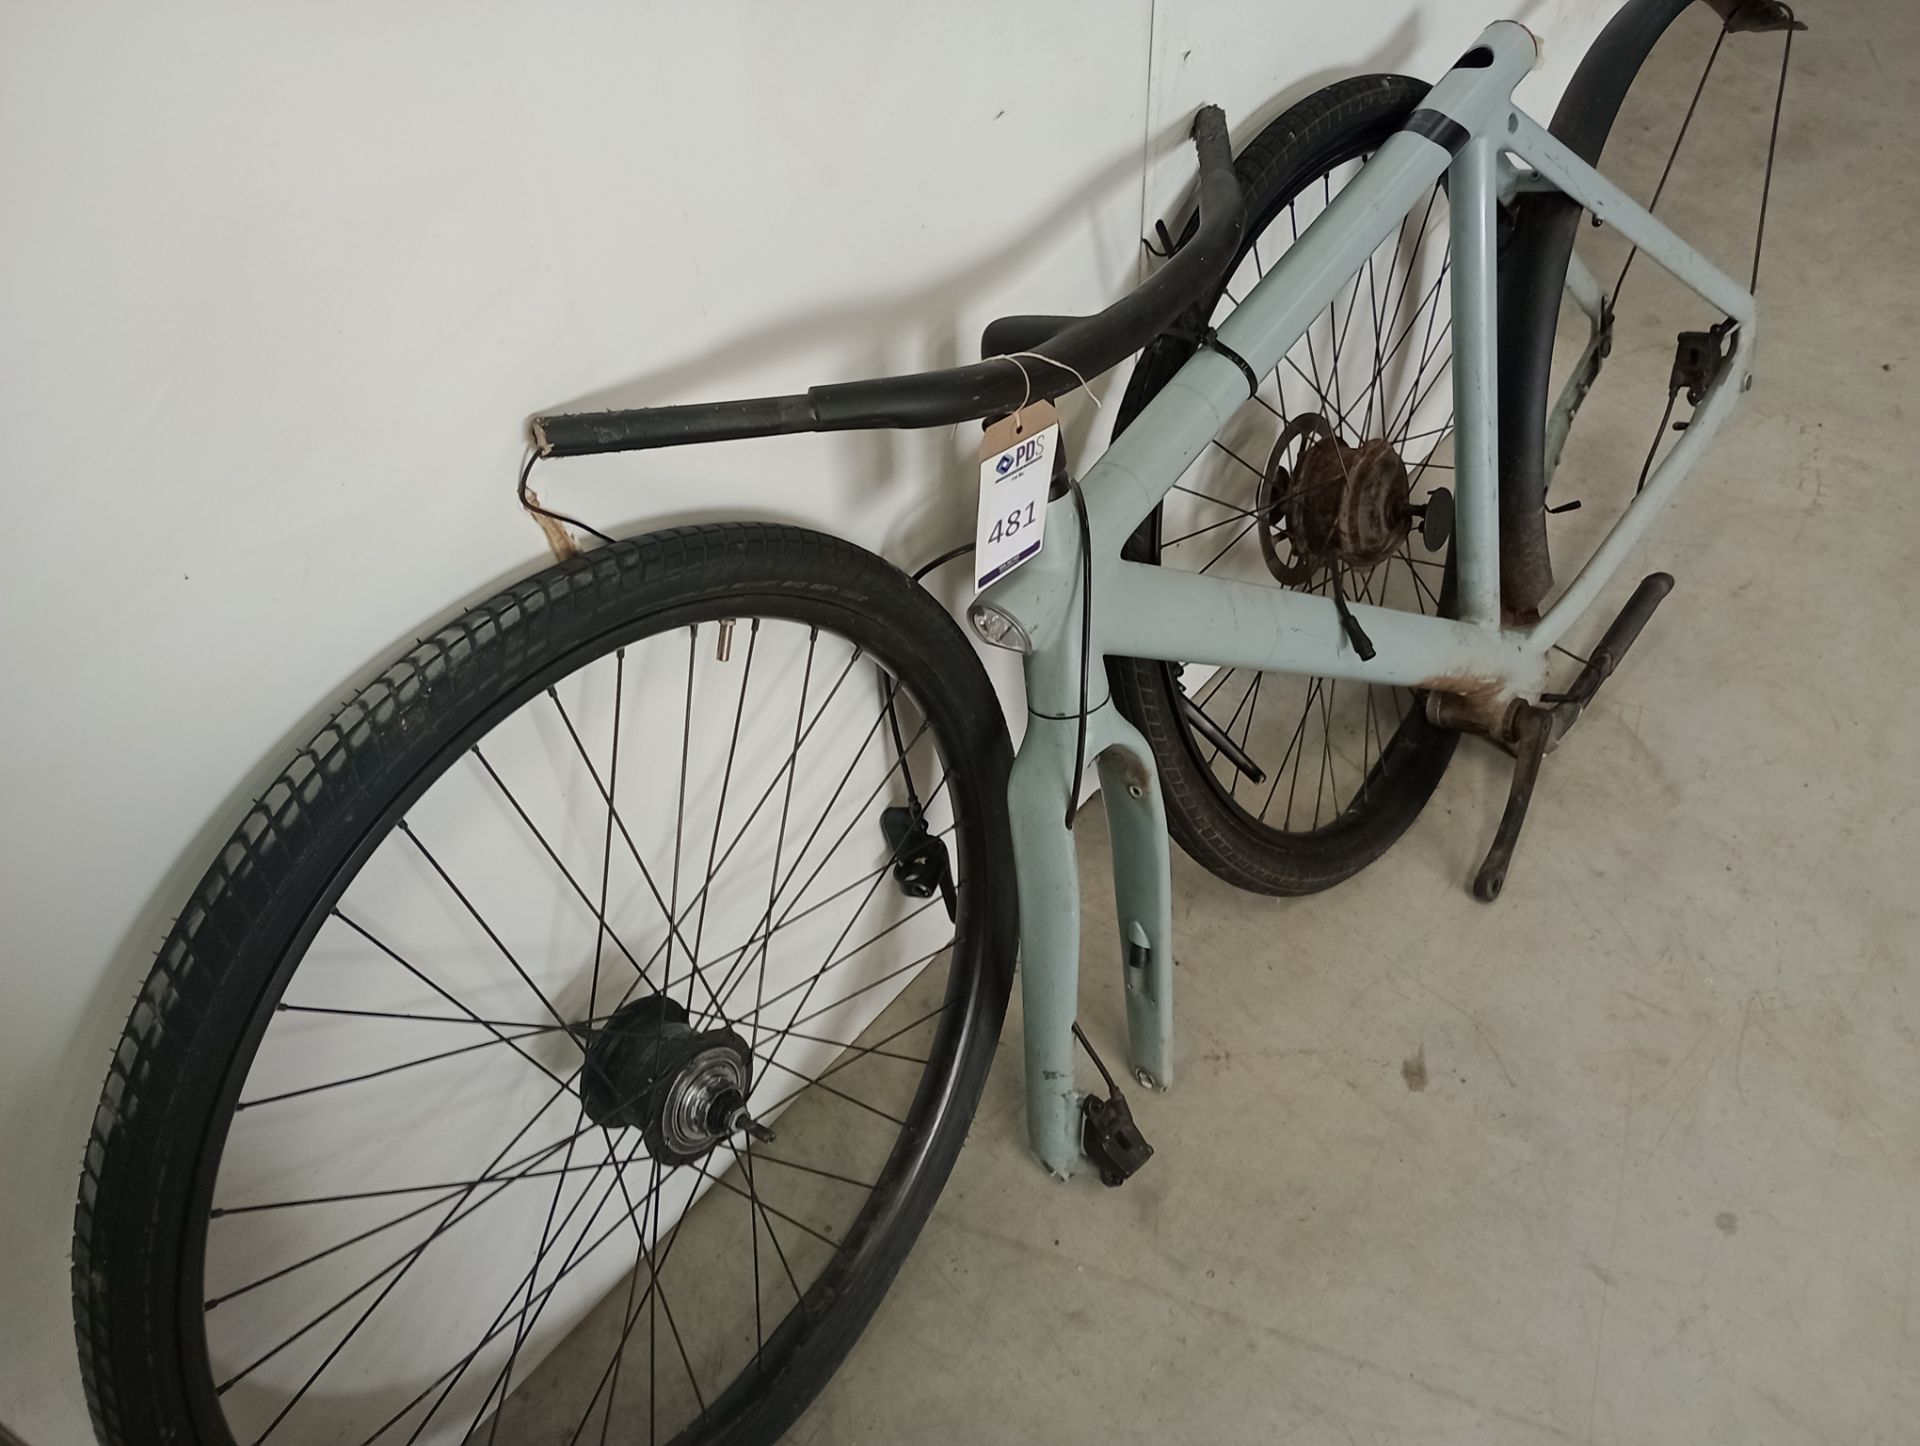 VanMoof S3 Electric Bike, Frame Number ASY1032620 (NOT ROADWORTHY - FOR SPARES ONLY) (No codes - Image 2 of 3